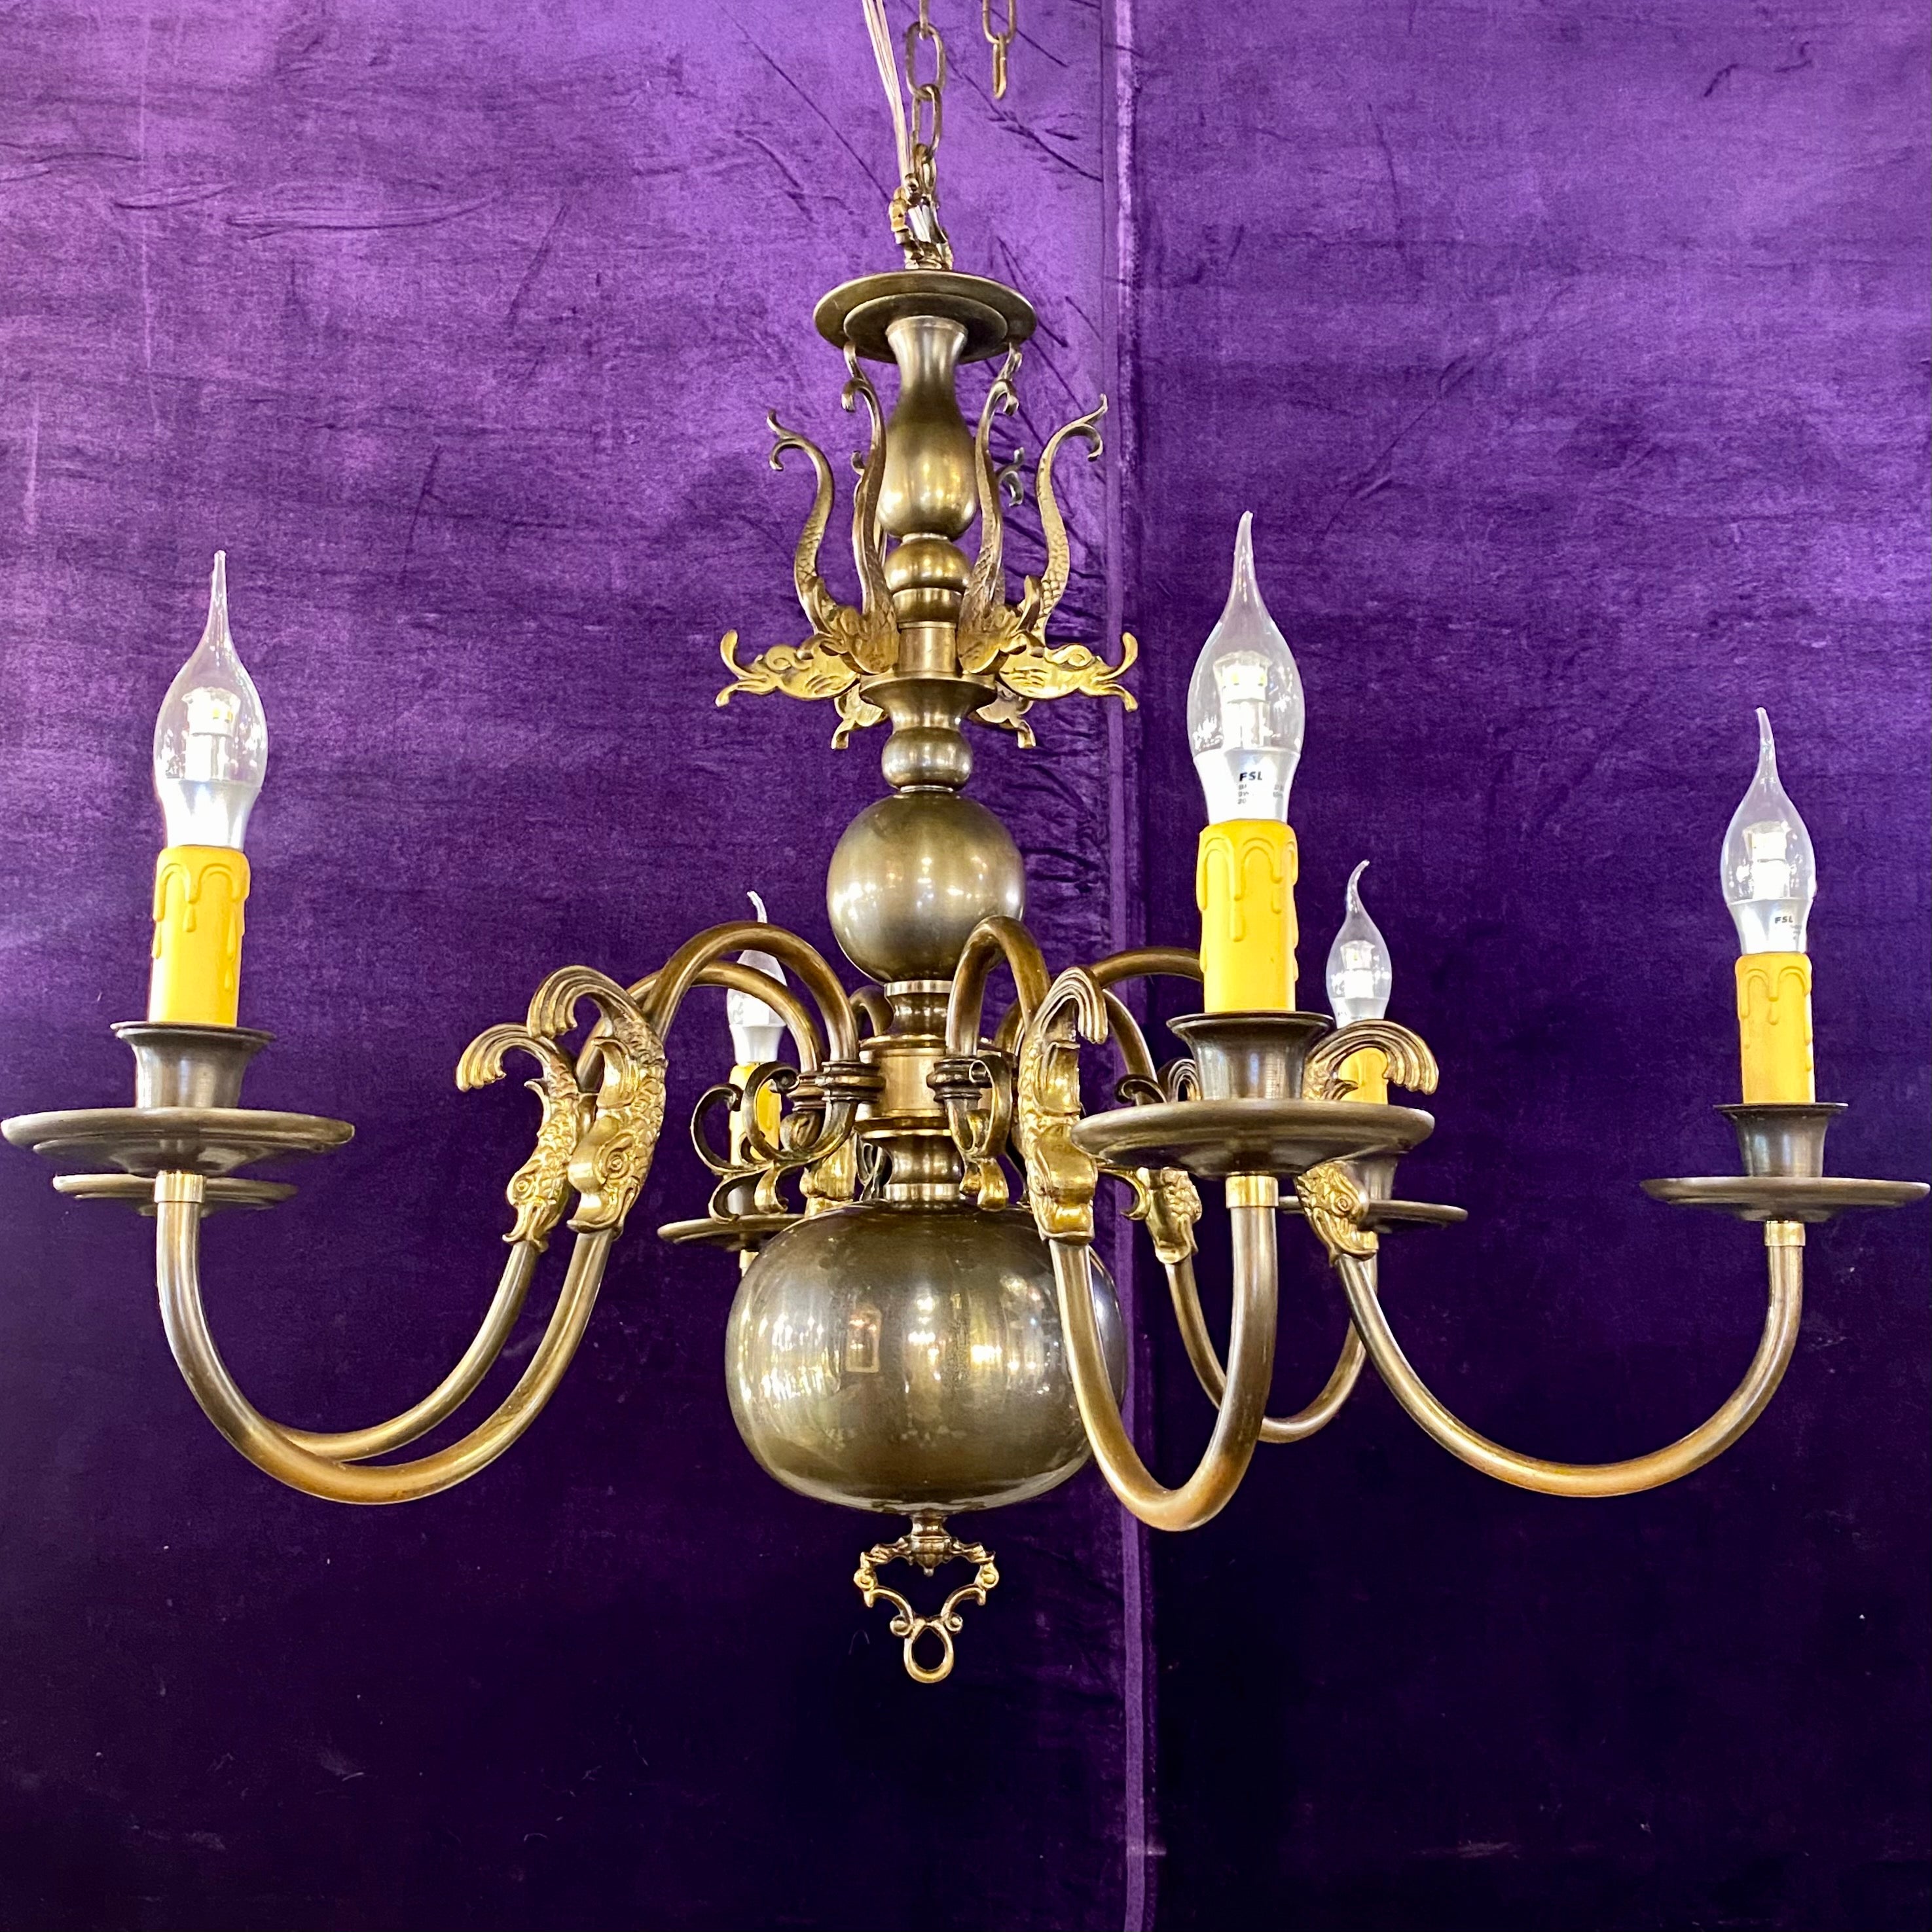 Aged Brass Flemish Chandeliers with Detailed Castings